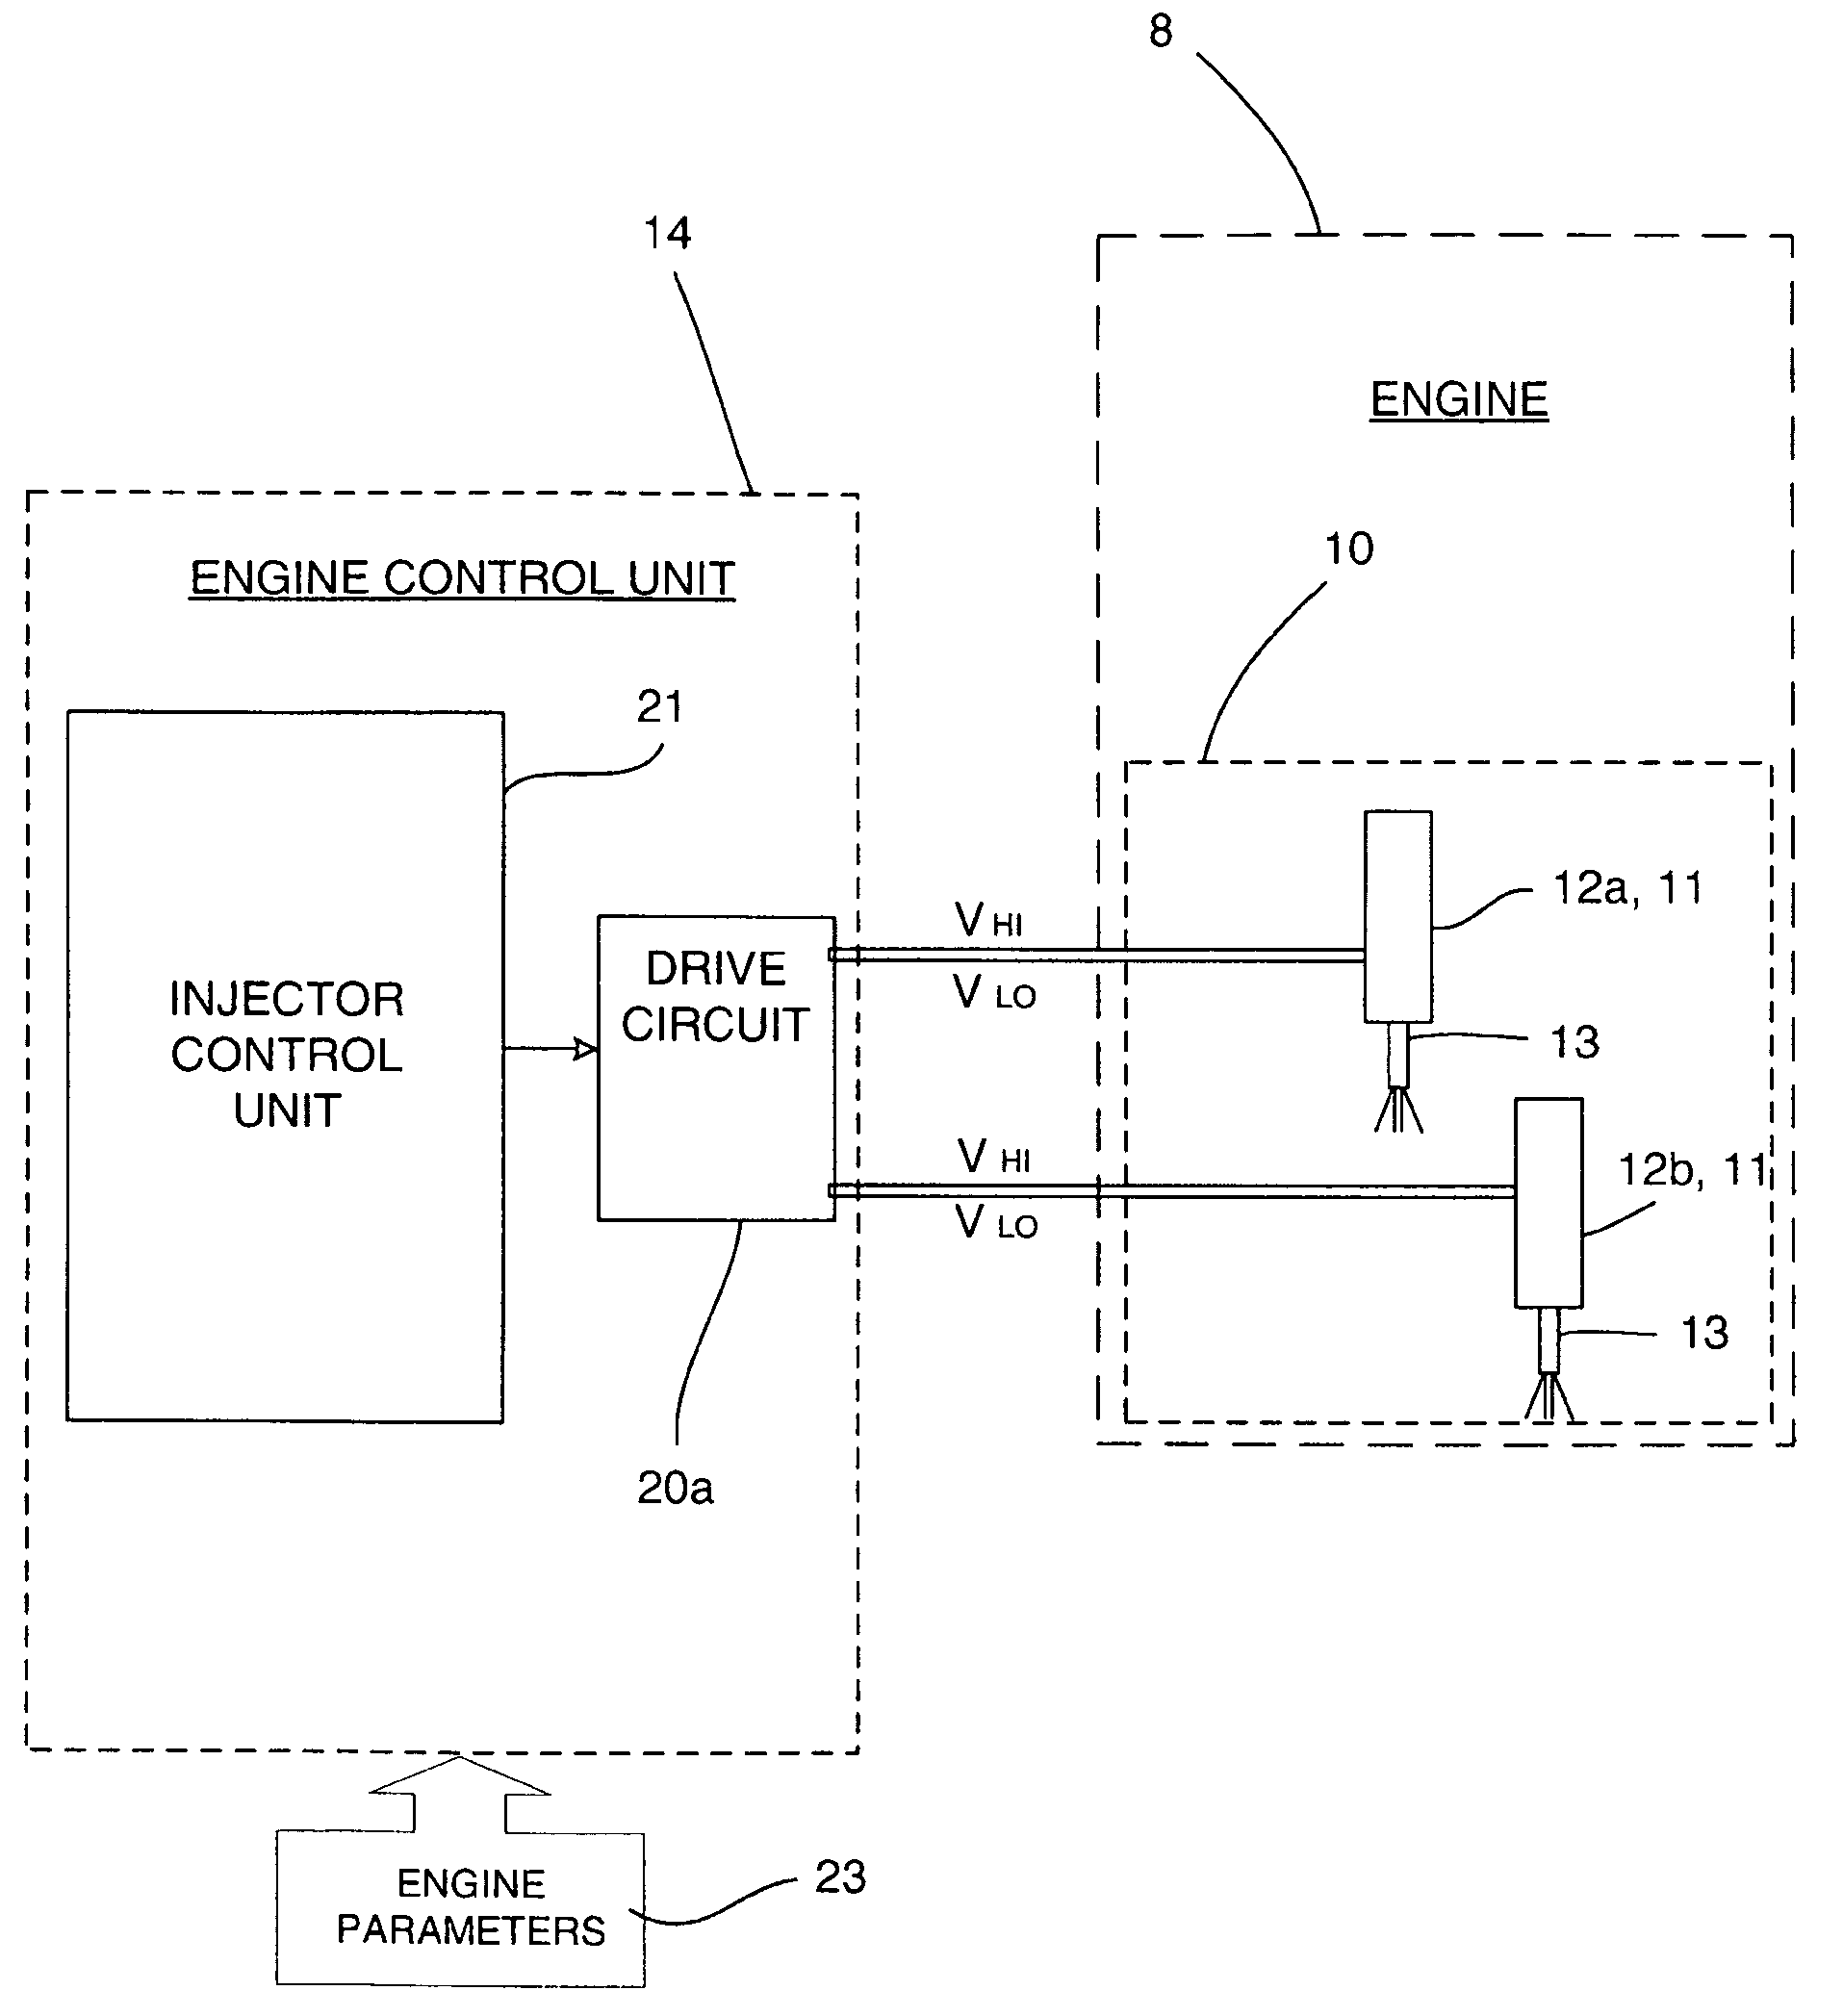 Injection control system